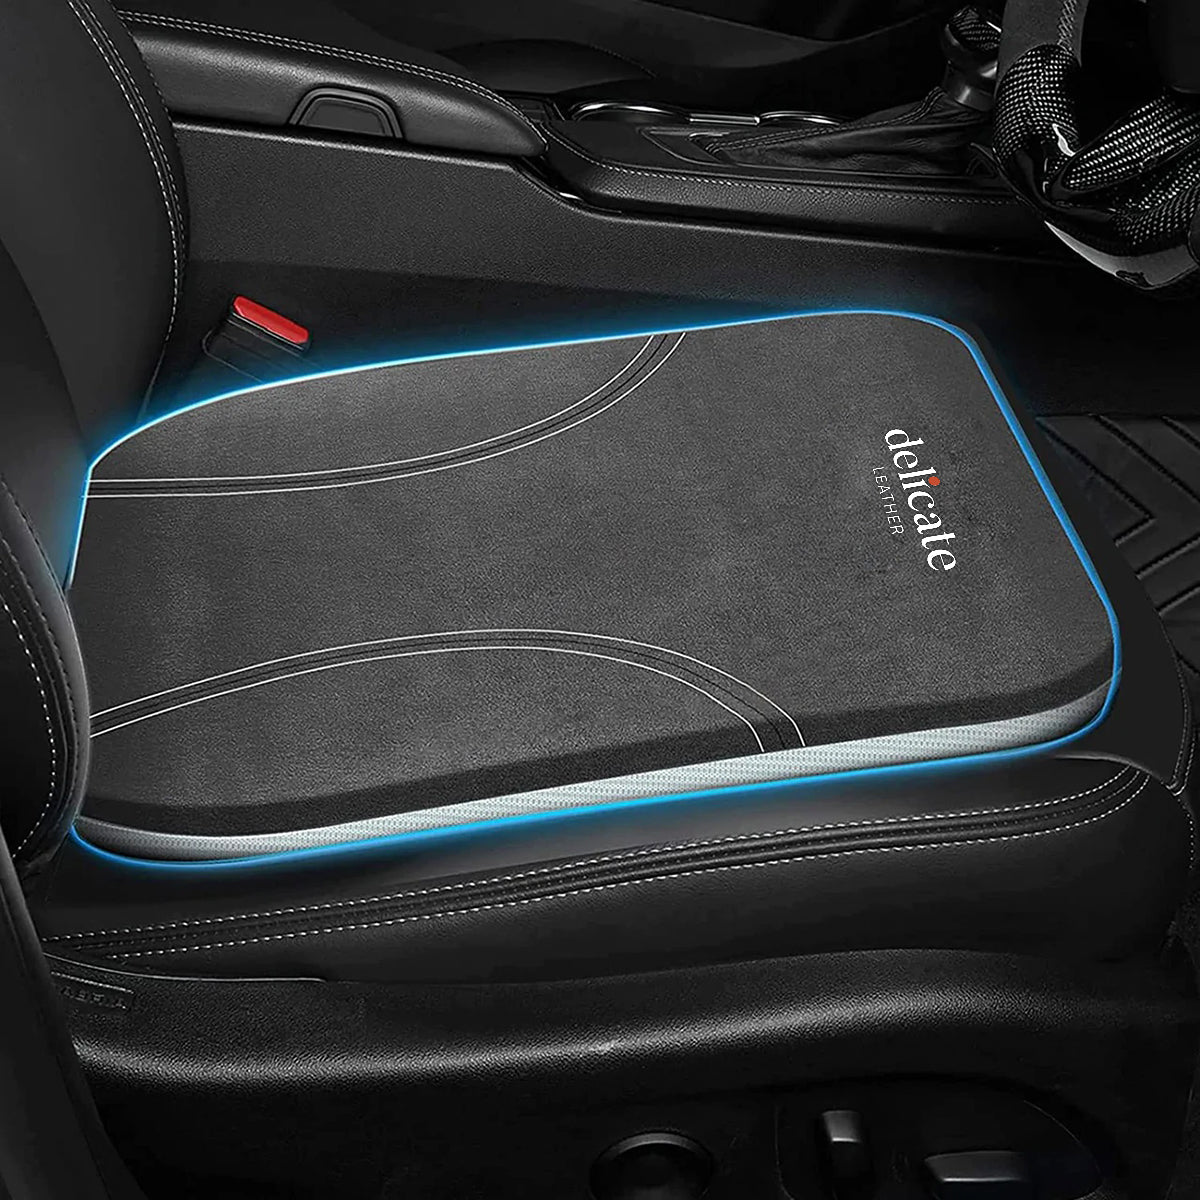 Delicate Leather Car Seat Cushion: Enhance Comfort and Support for Your Drive